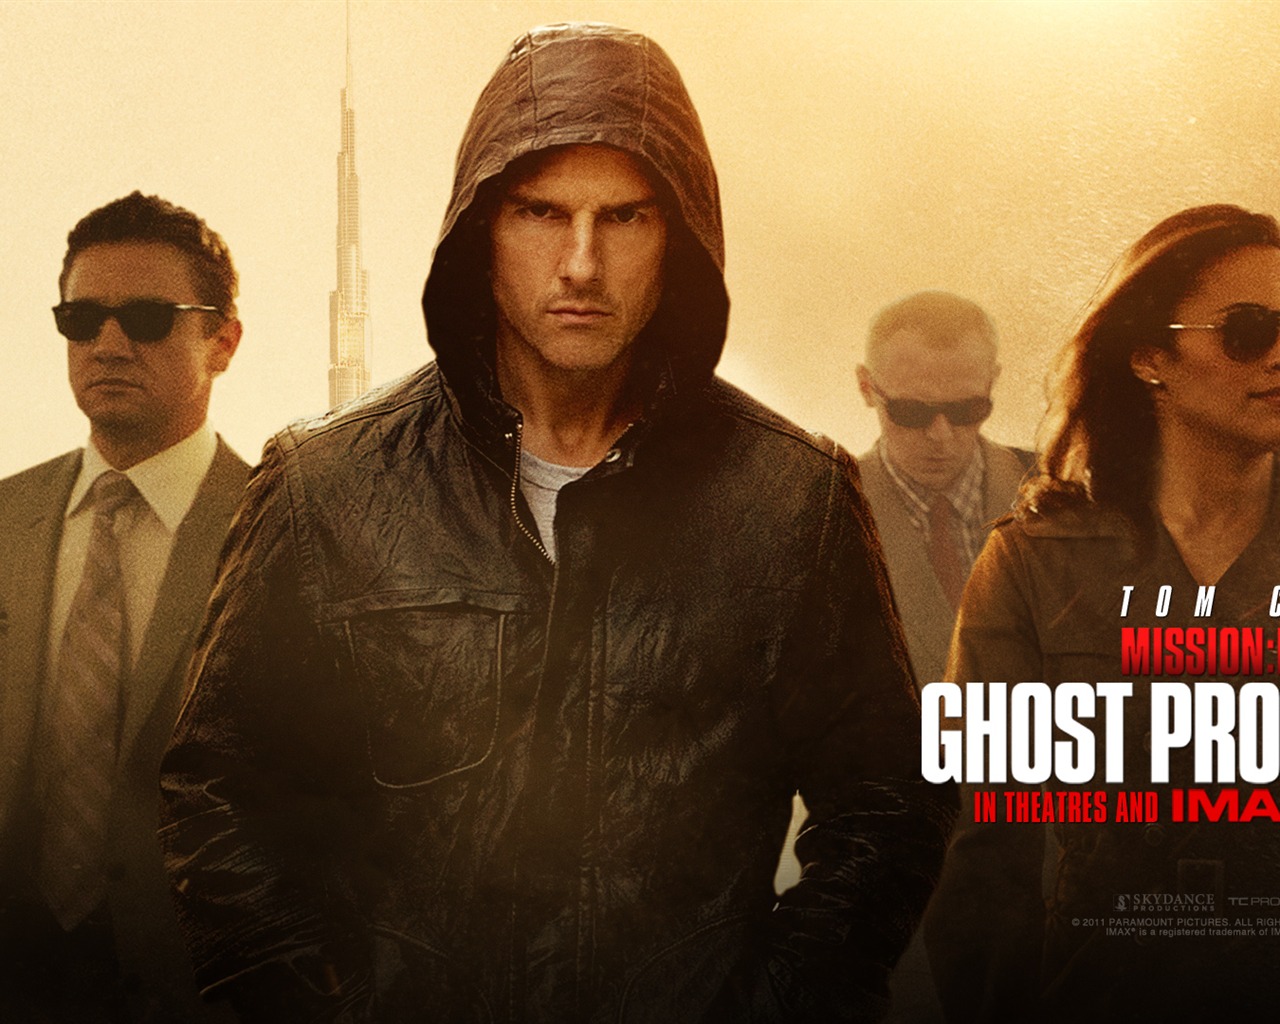 Mission: Impossible - Ghost Protocol HD wallpapers #1 - 1280x1024